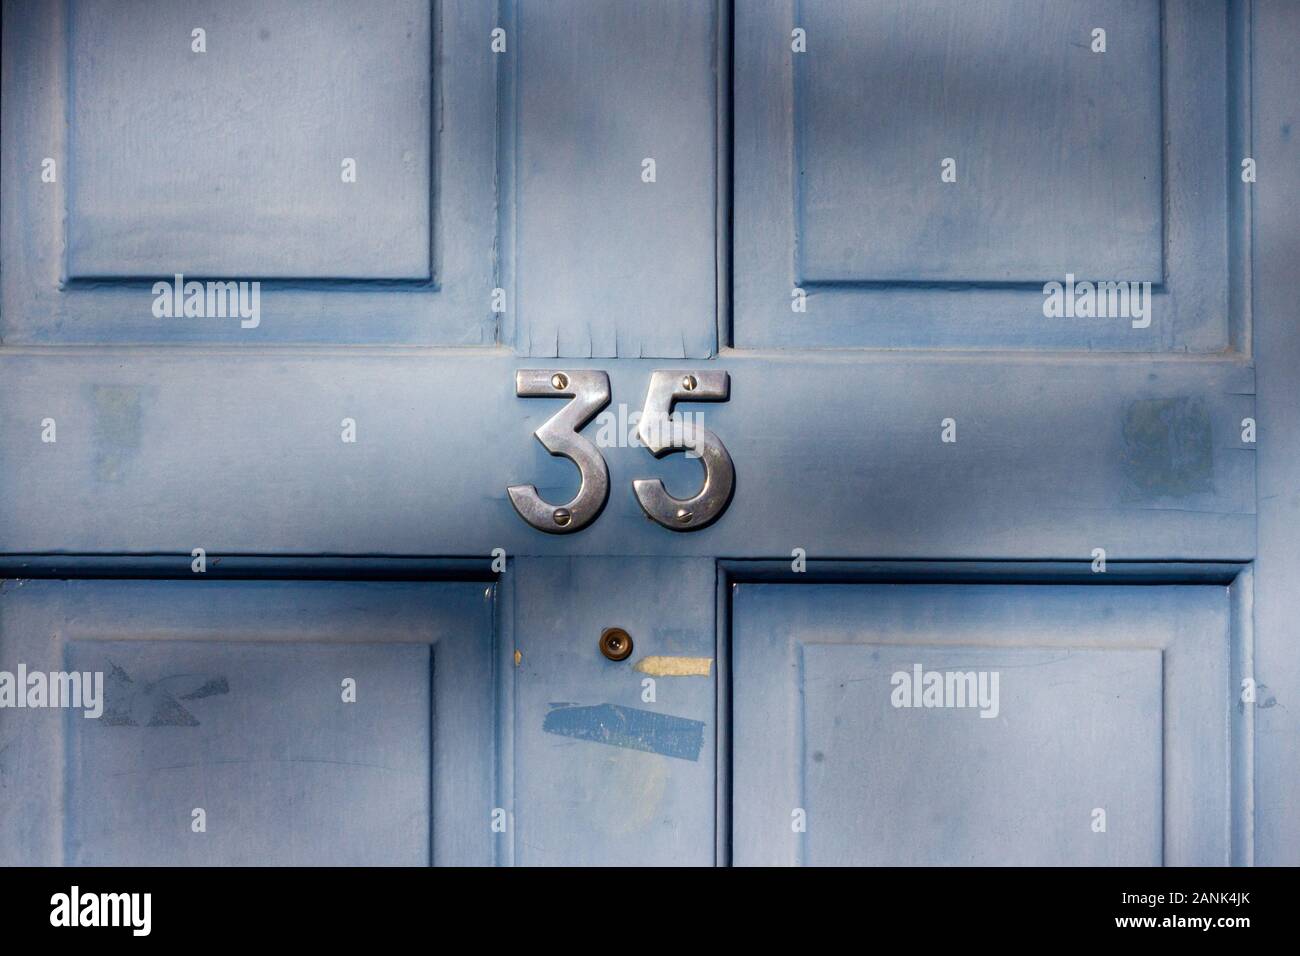 House number 35 in London Stock Photo